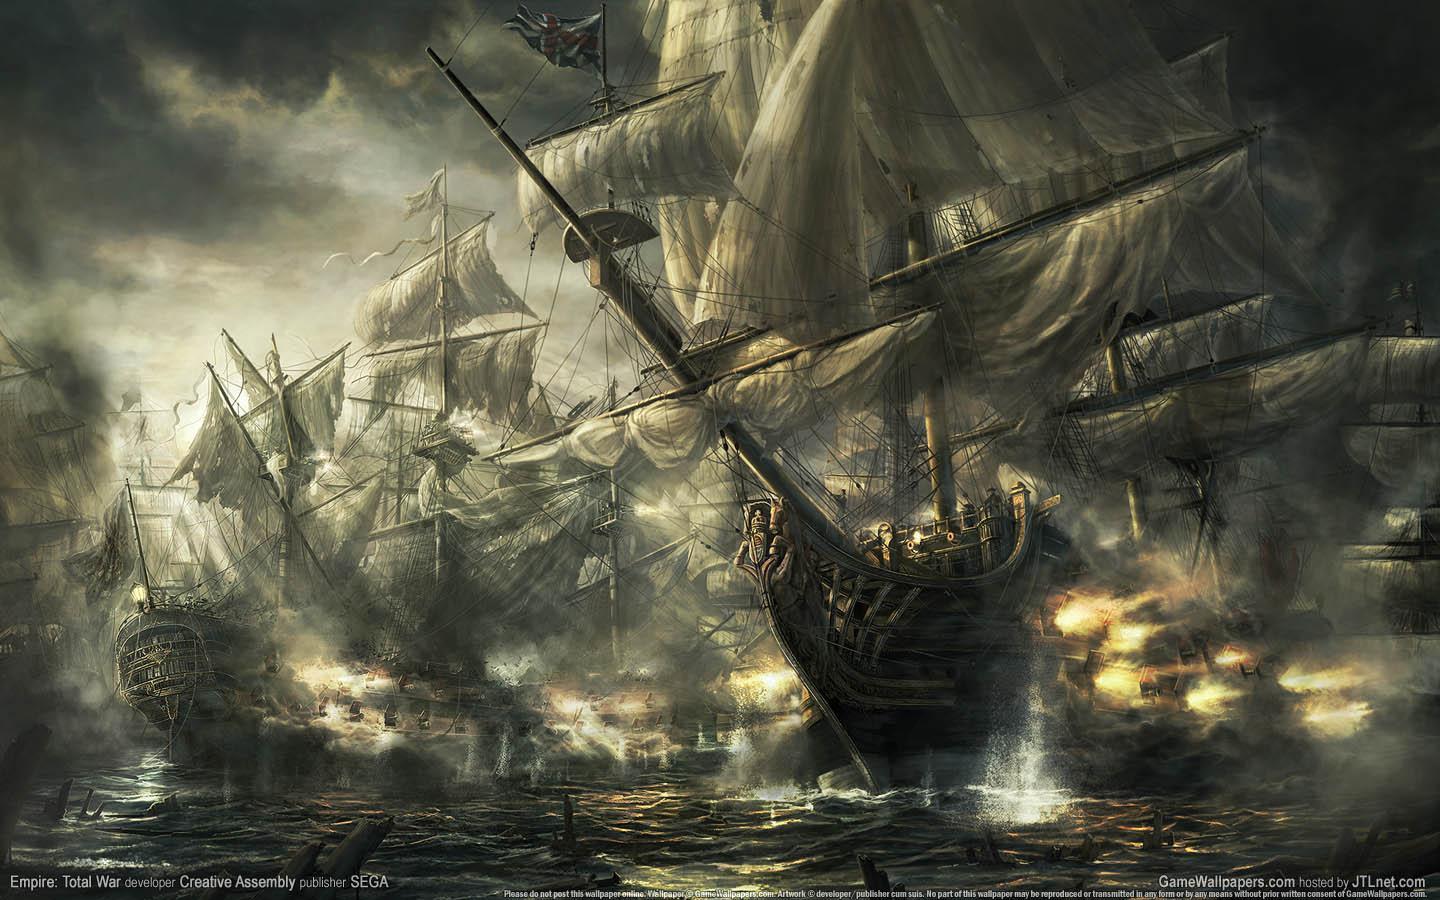 A painting of ships in the water - Pirate